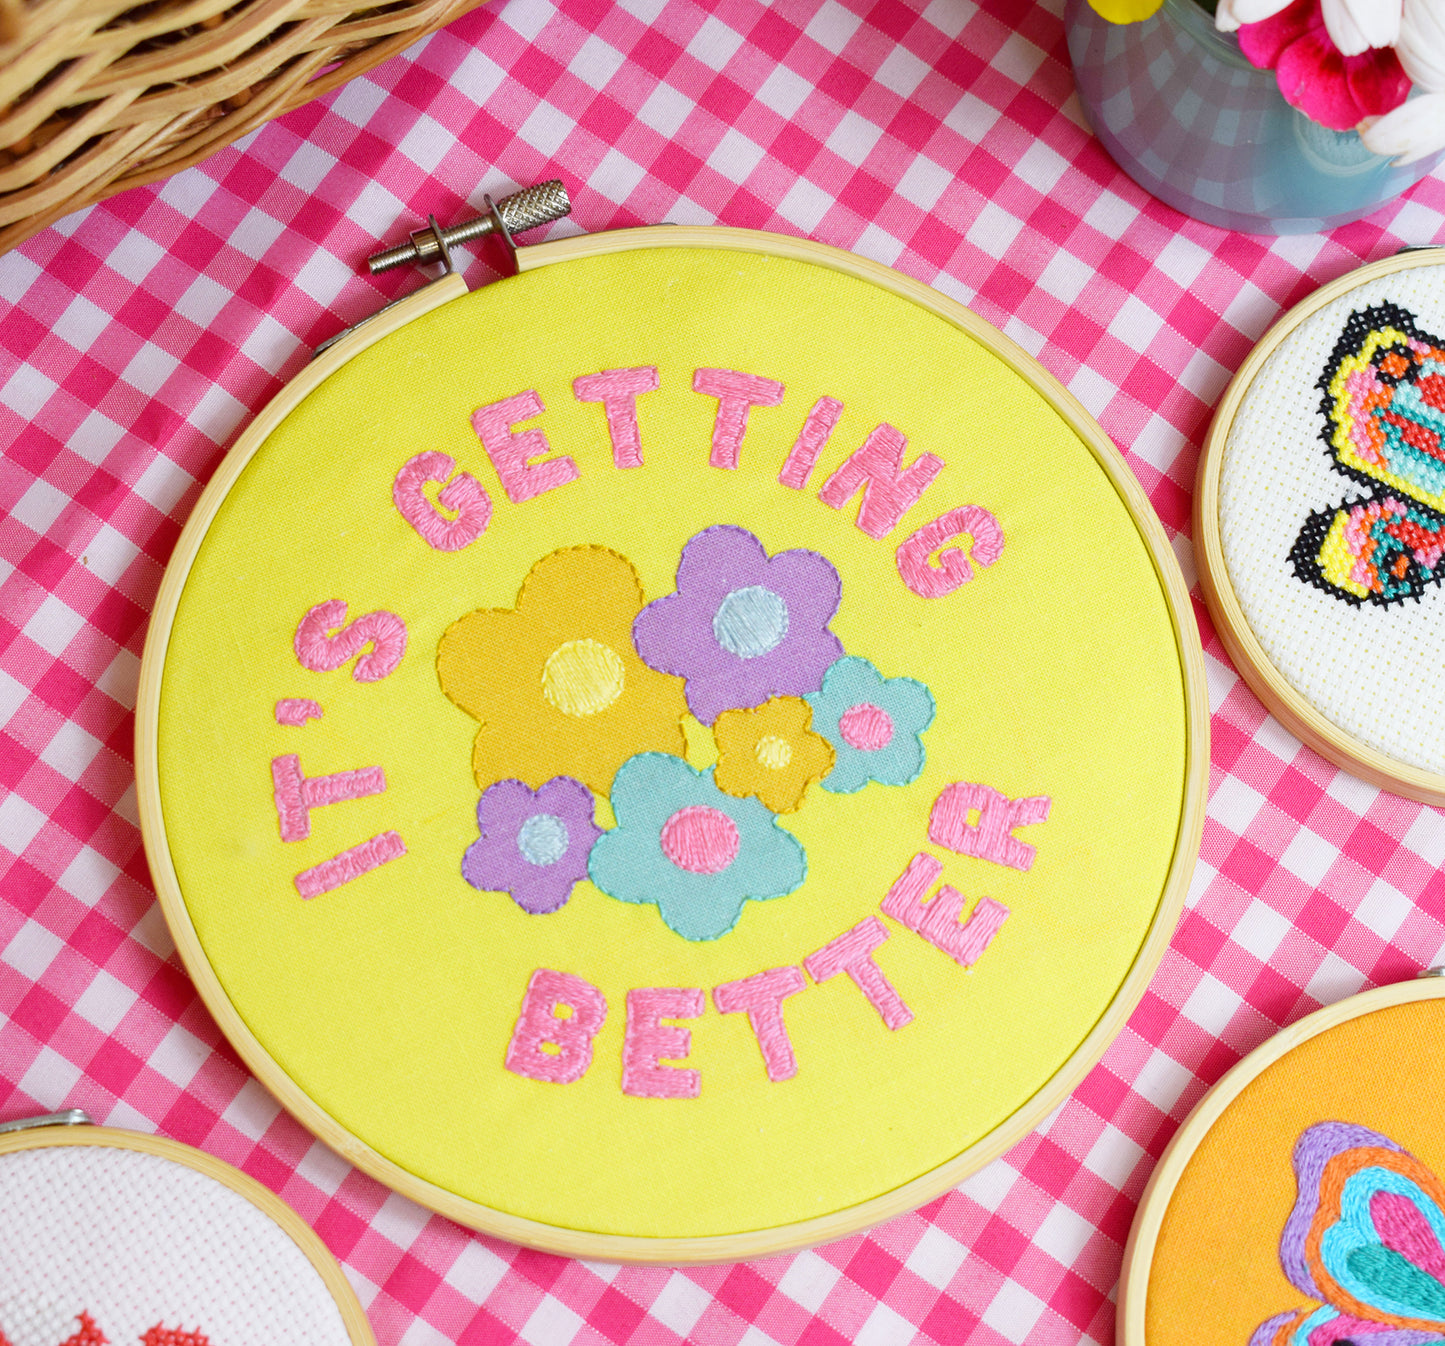 'It's Getting Better' Large Embroidery Kit